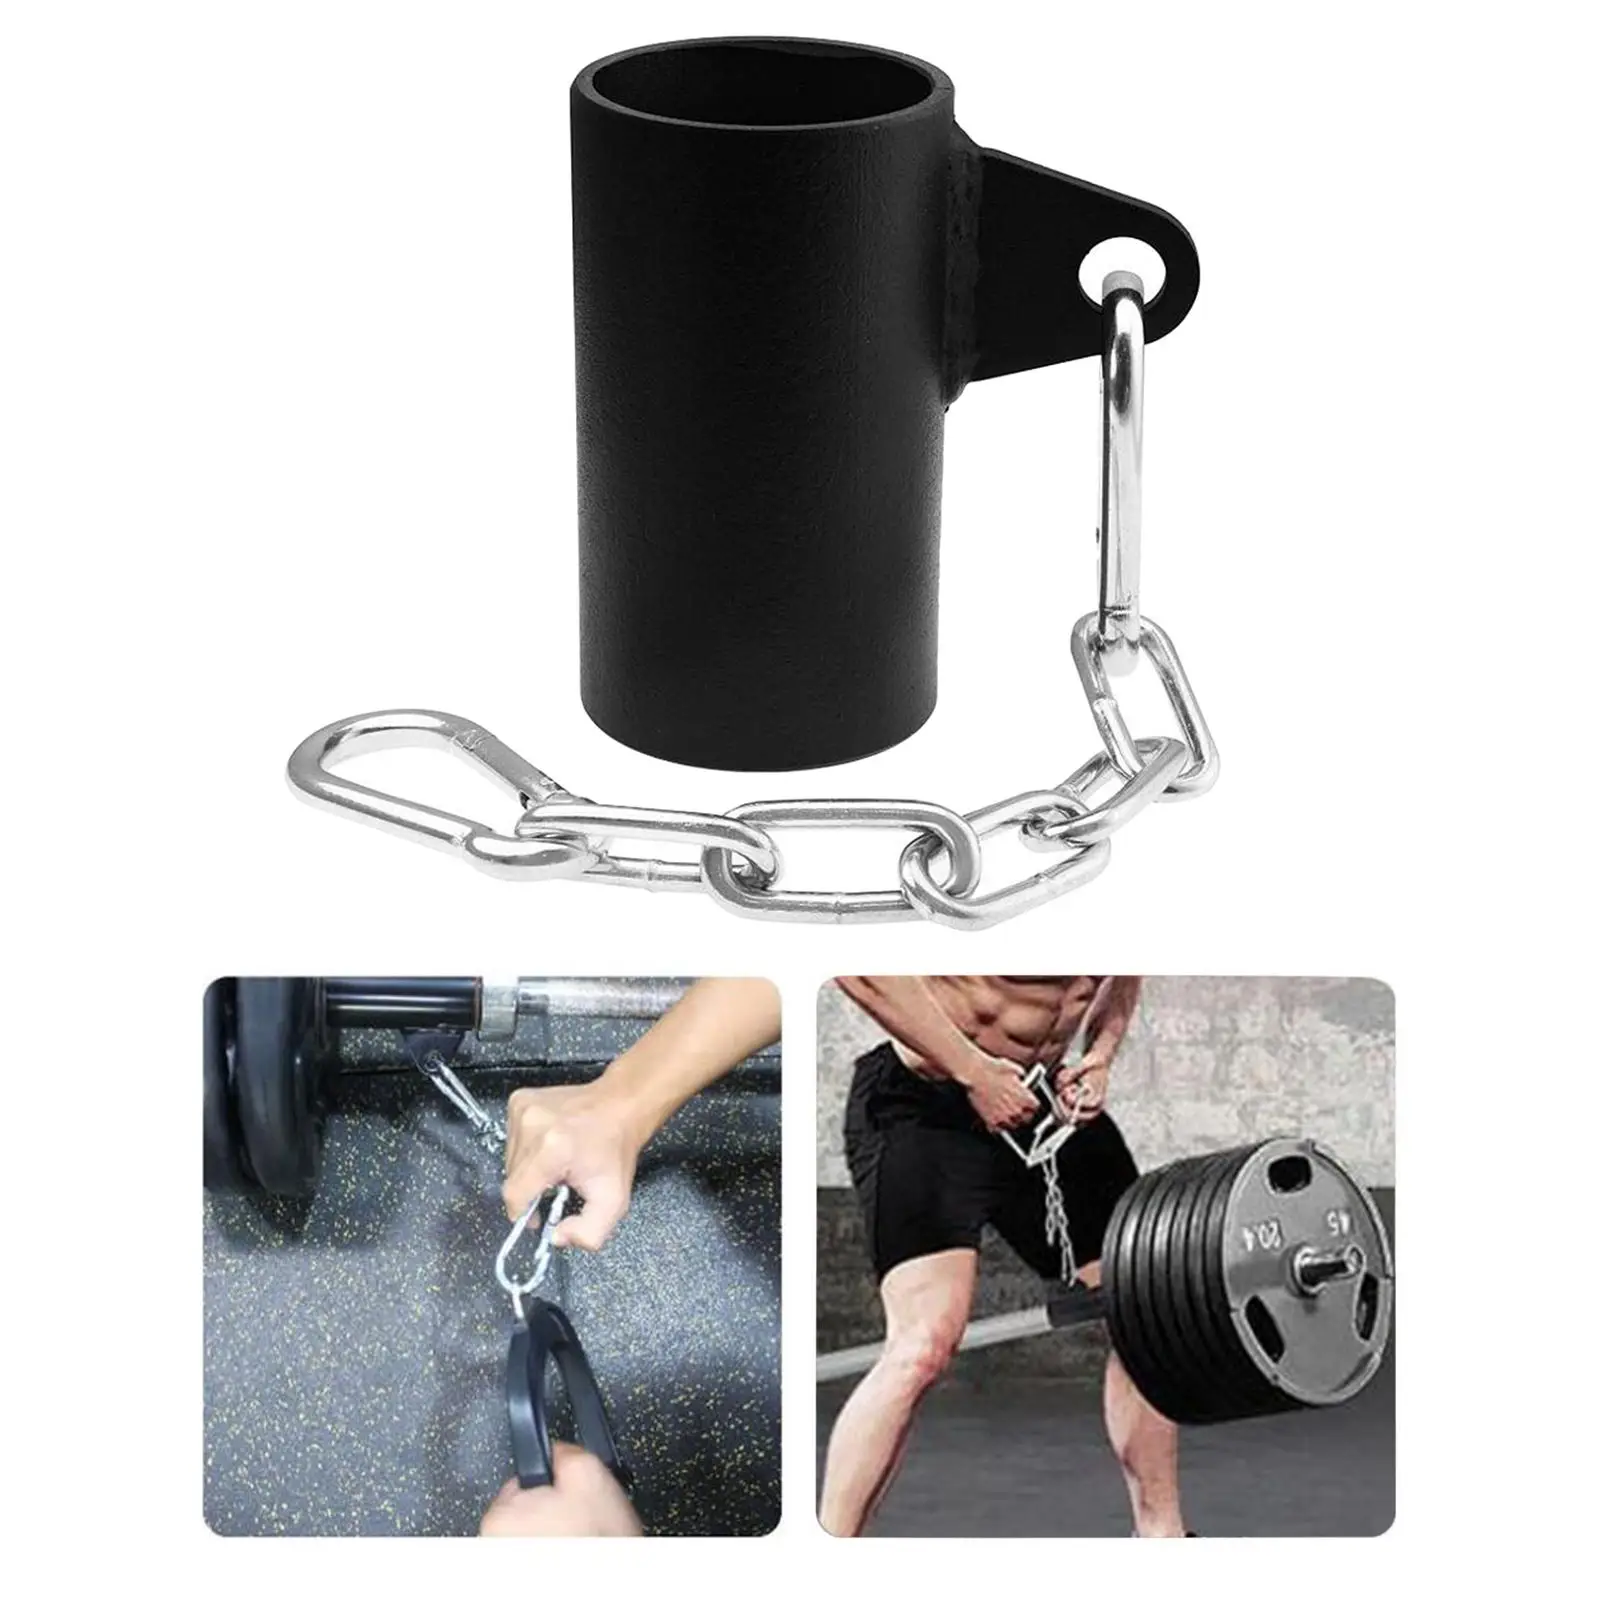 Lightweight T Bars Row Platform with Chain Barbell Bar Swivel Eyelet Attachment Fitness Workout, Home, Gym,Bent Over Exercises